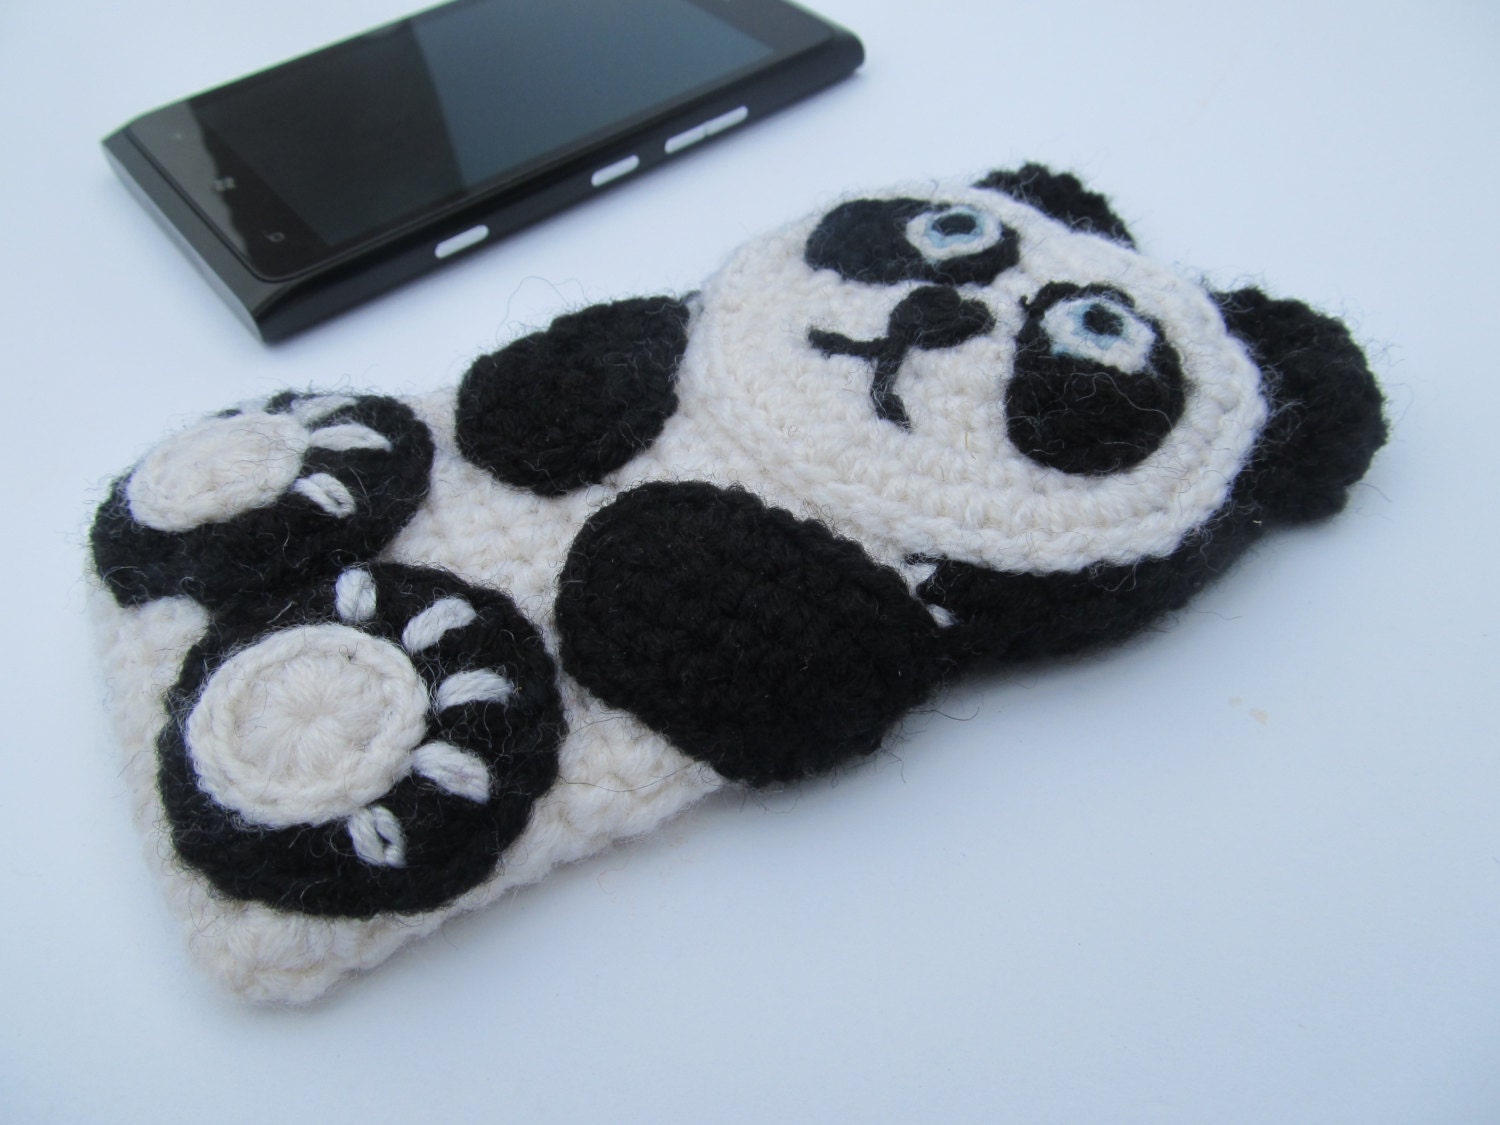 Panda crochet case, sleeve, cover for iPhone, iPod touch or any other phone